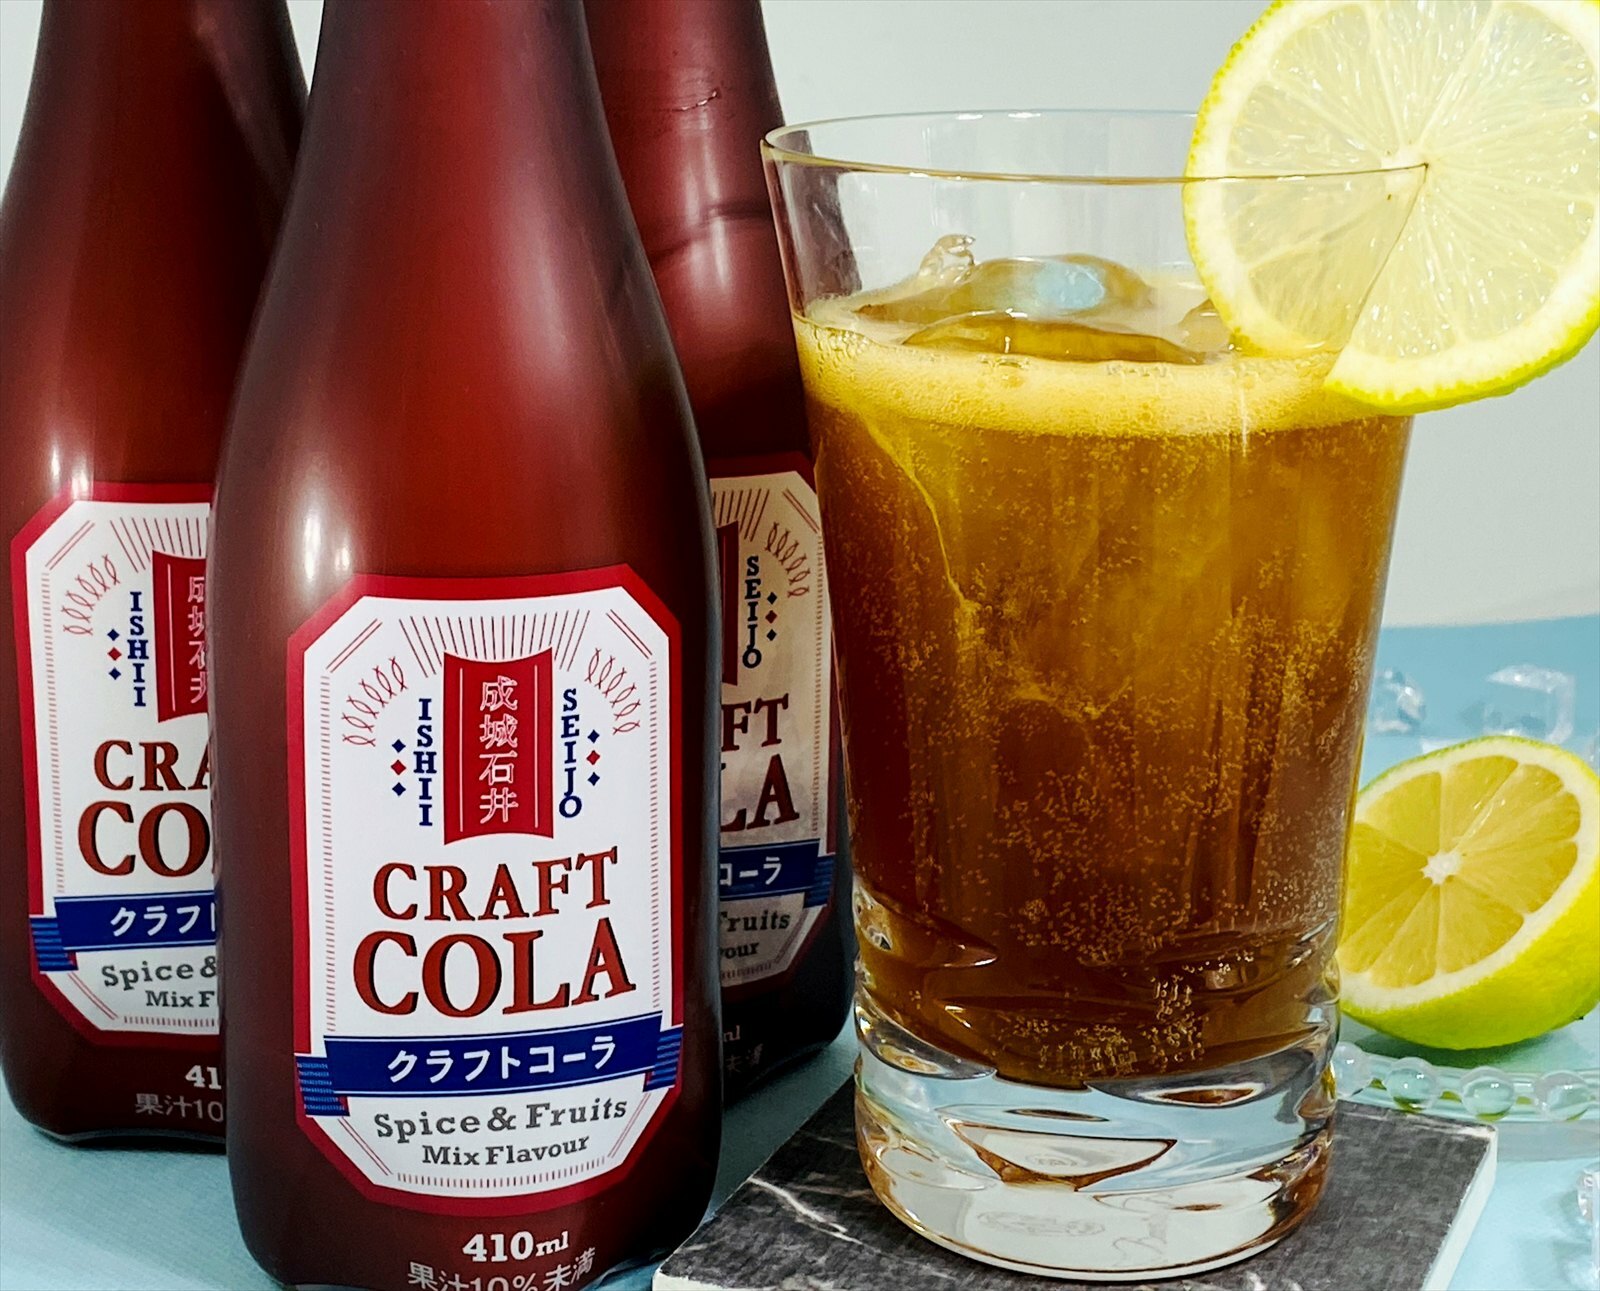 Seijo Ishii Craft Cola. Spice & Fruits Mix Flavour 